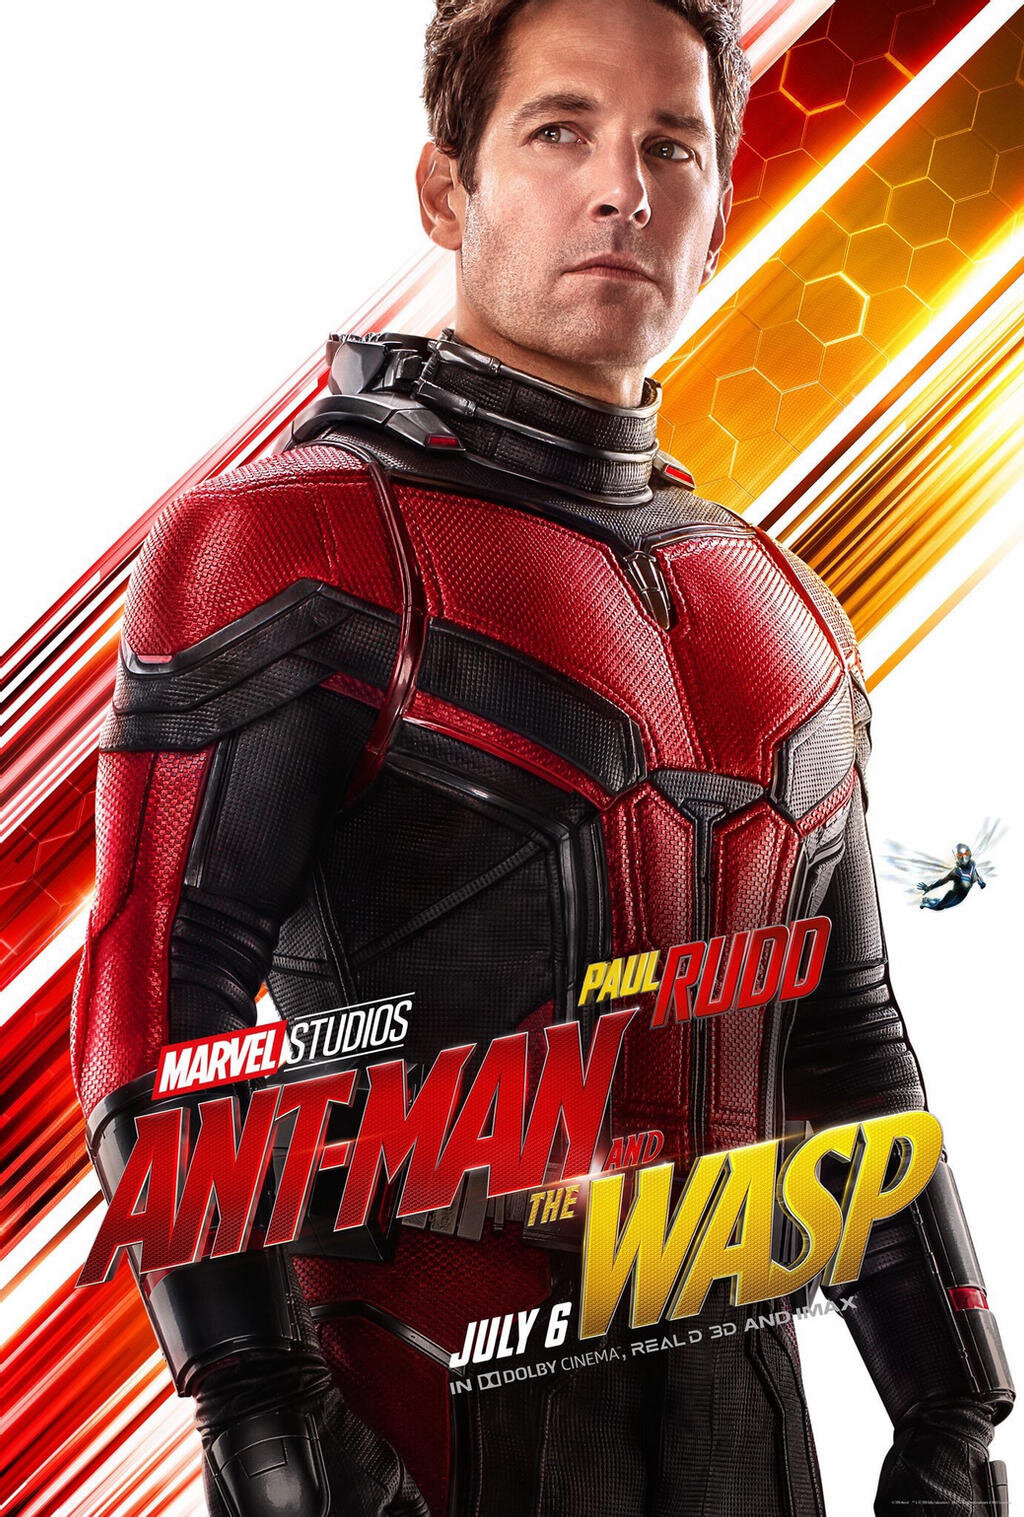 ant_man_and_the_wasp_scott_lang_poster_by_artlover67_dcdmr0f-fullview.jpg